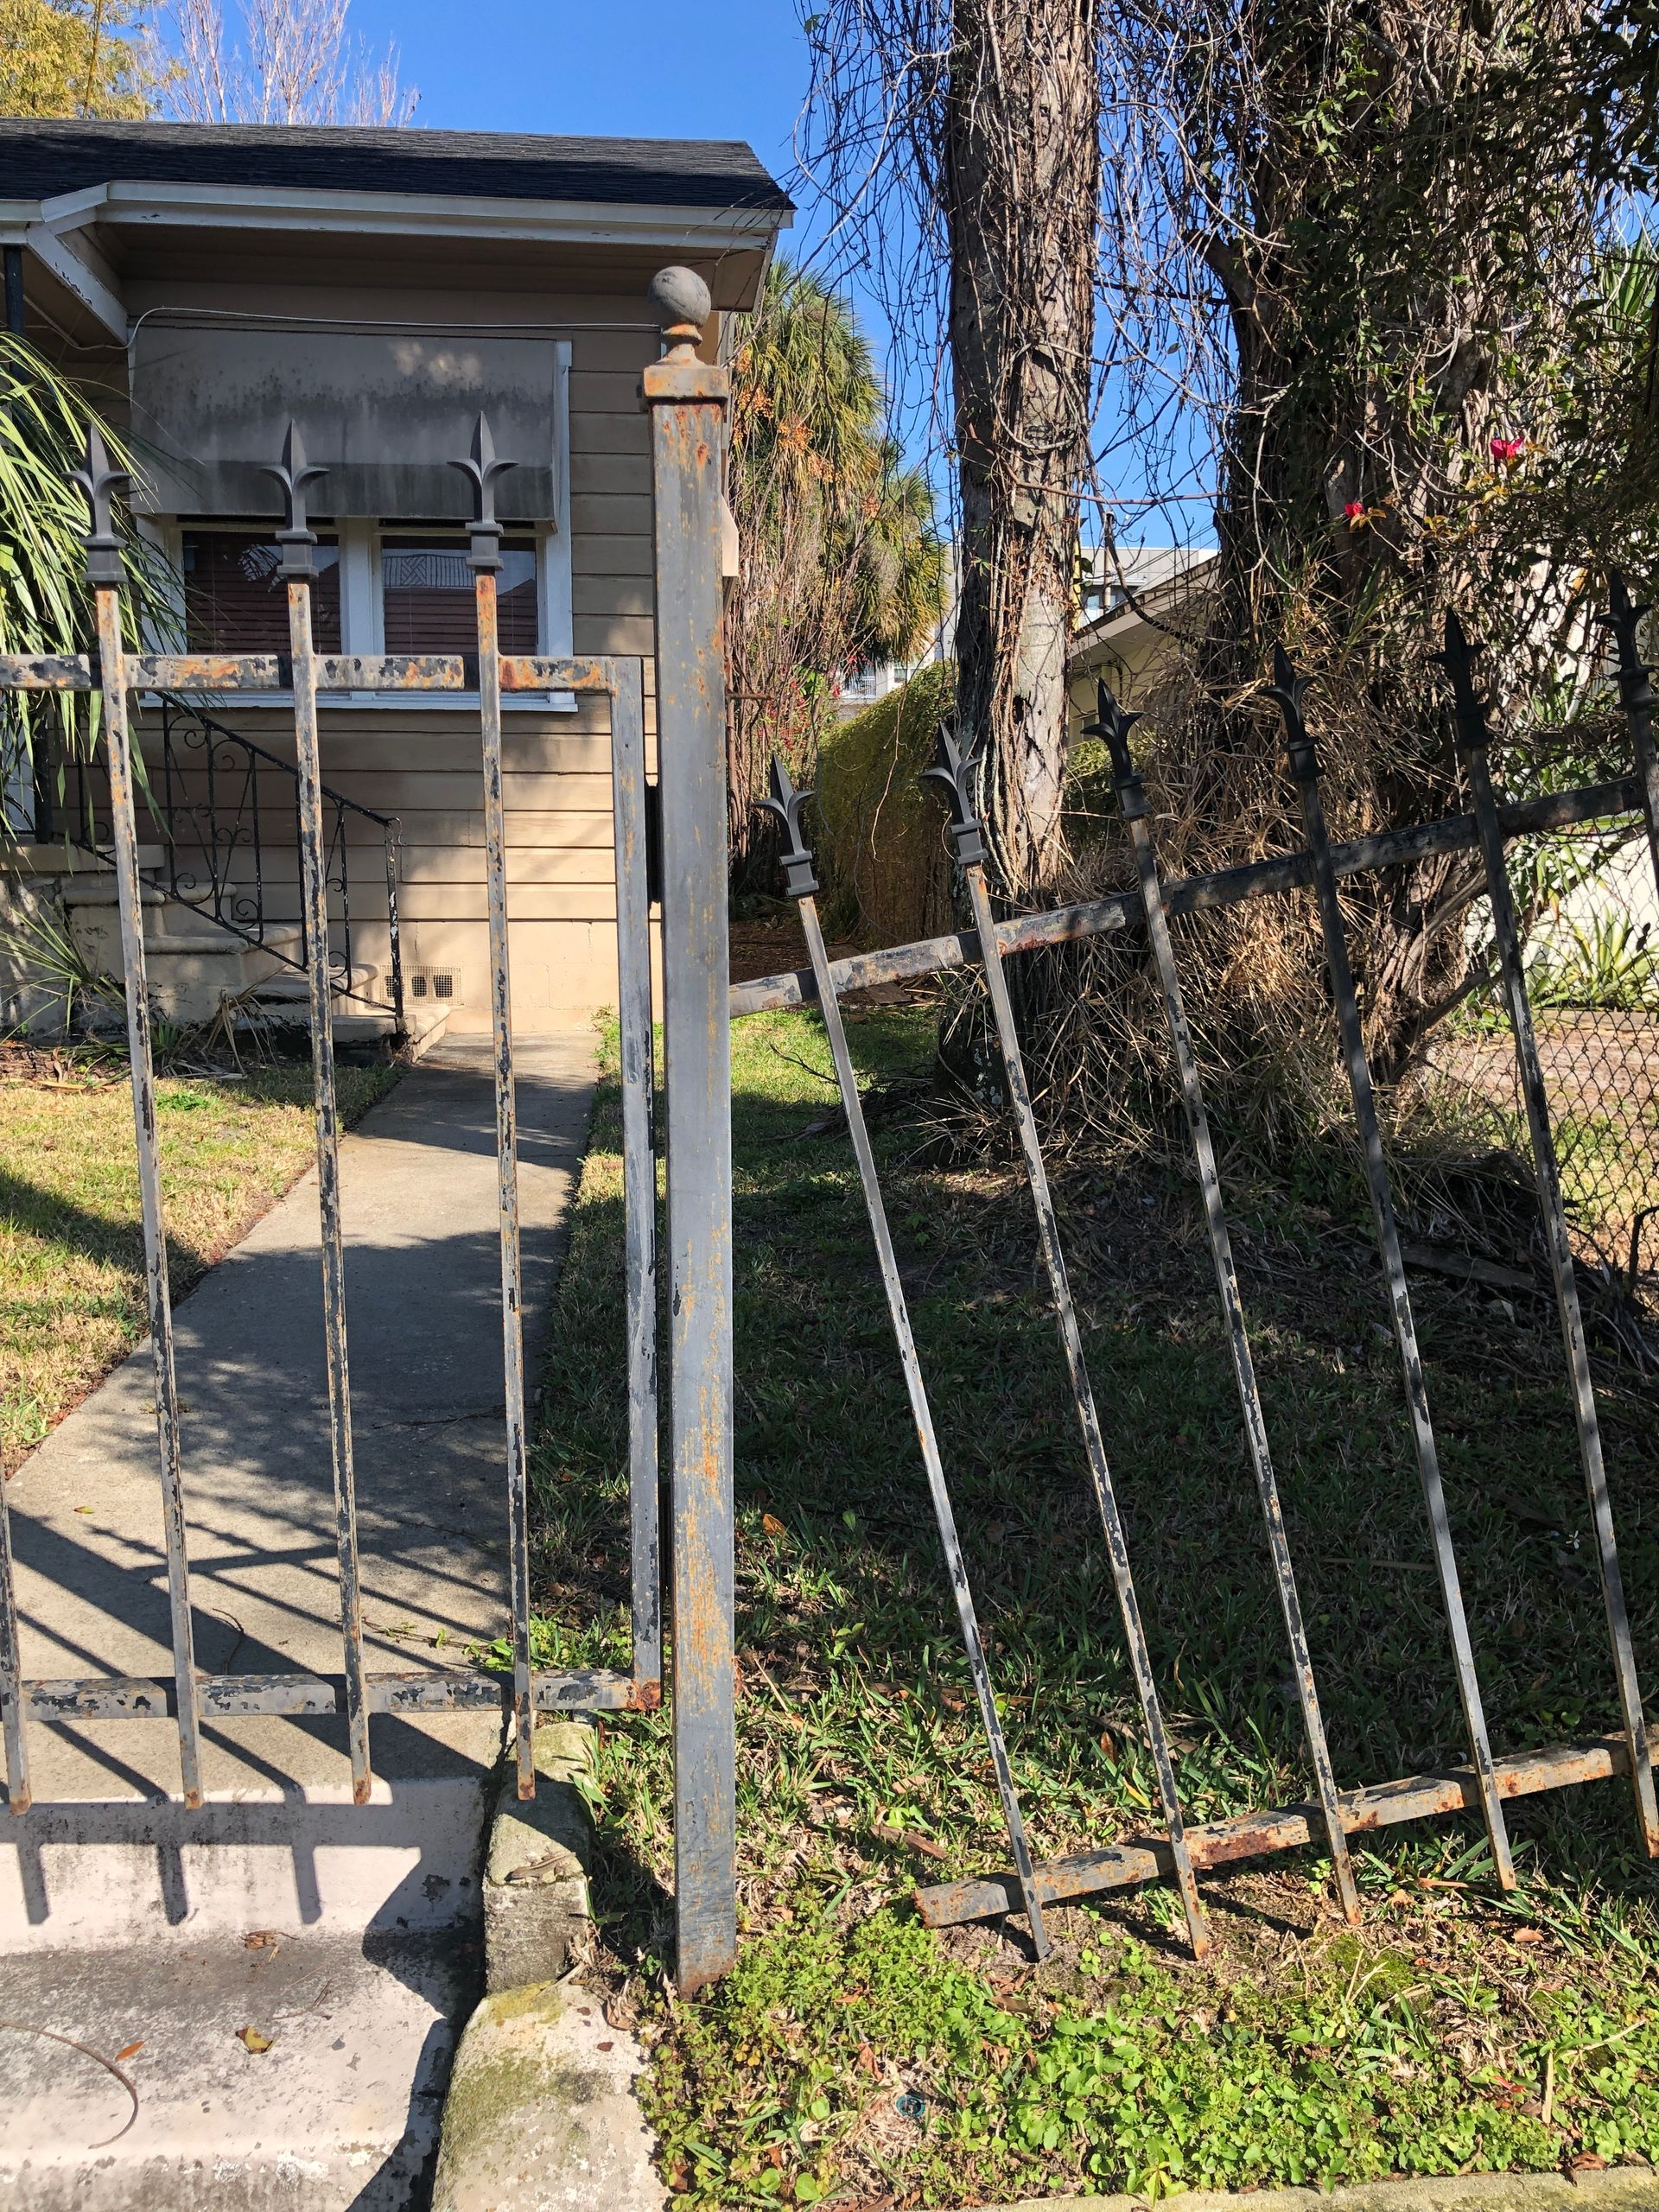 A rusted iron fence in front of a single-family home in South Tampa